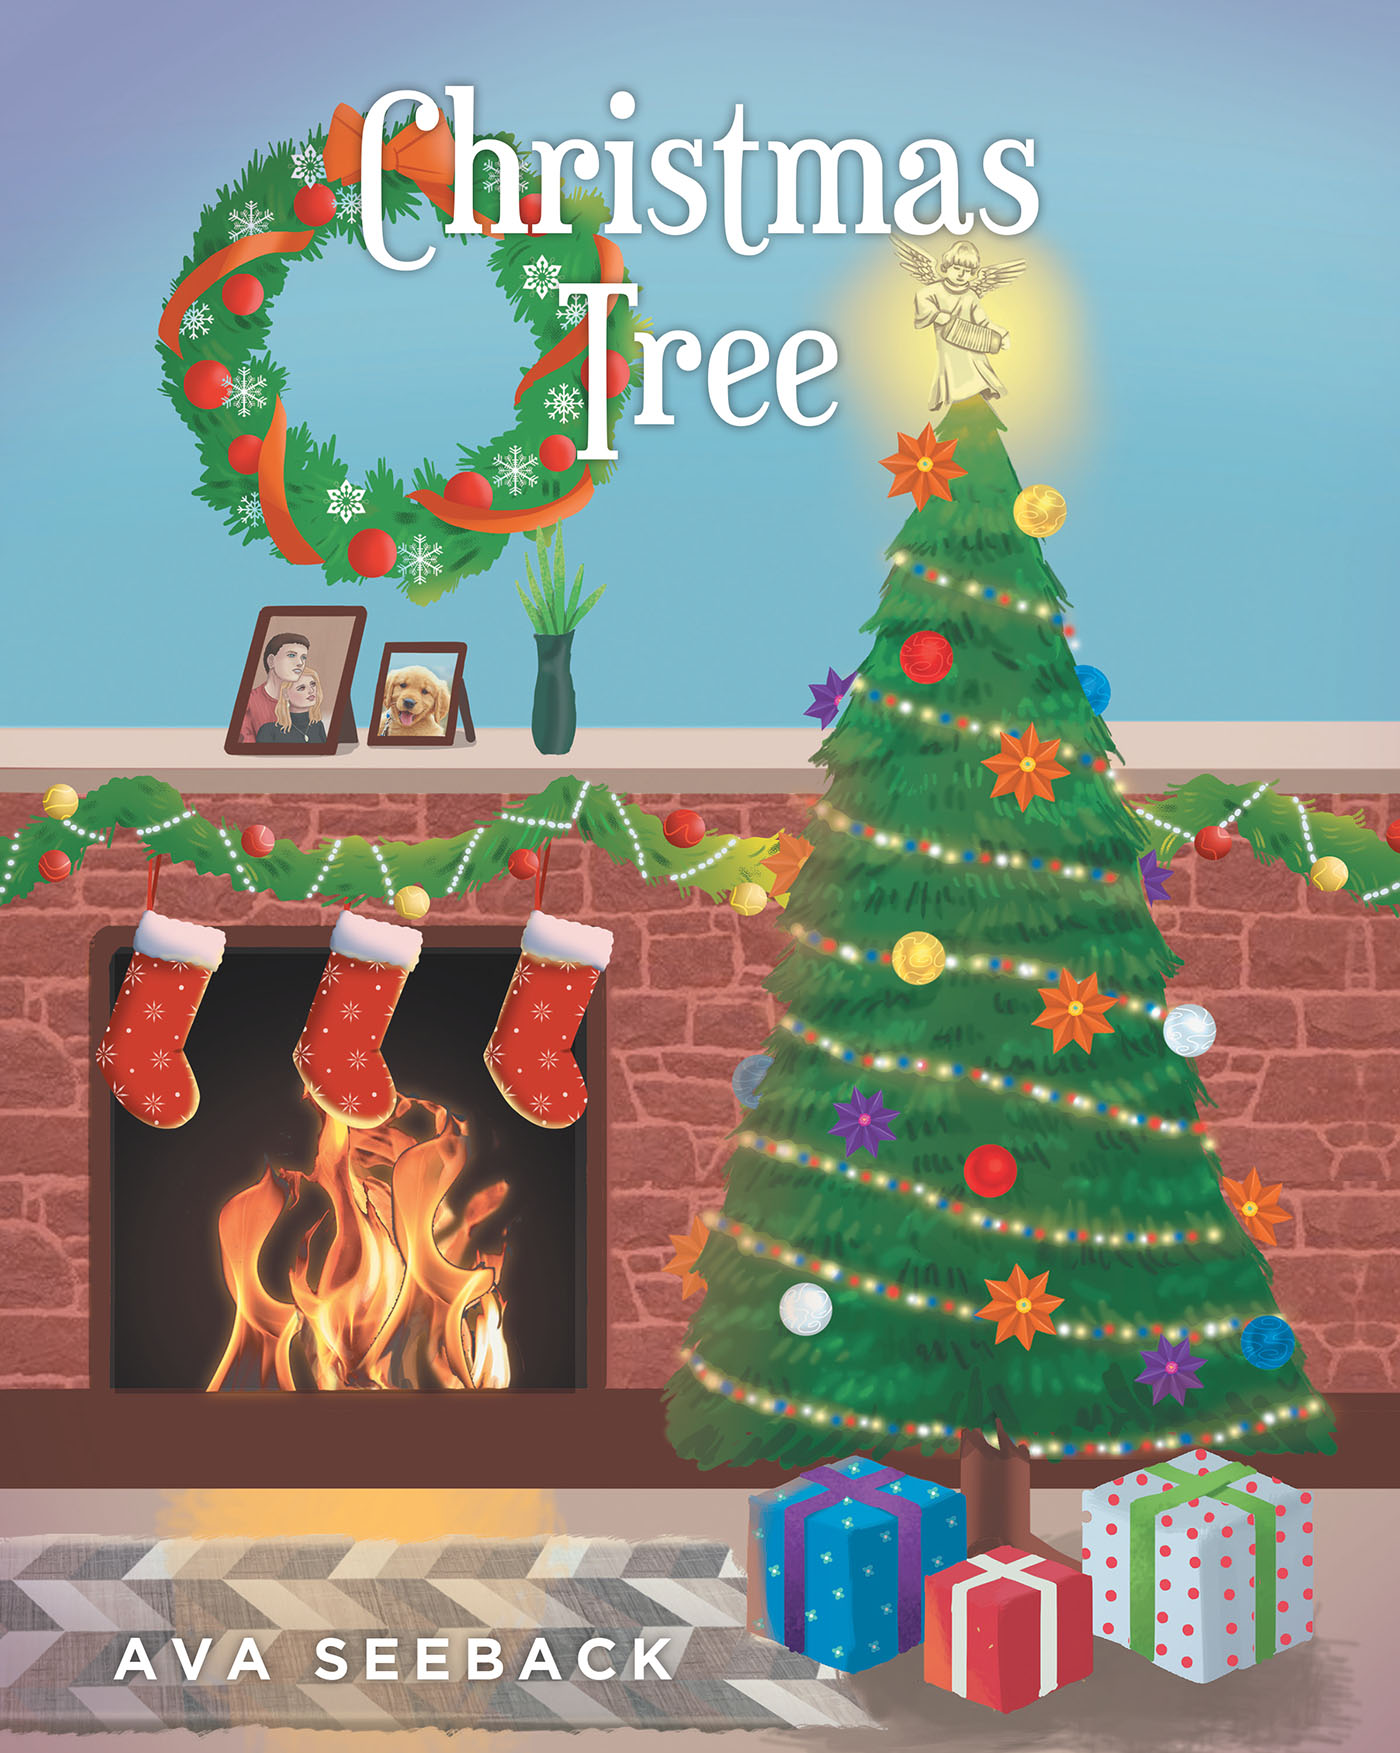 Ava Seeback’s New Book, "Christmas Tree," is a Captivating Tale That Follows a Christmas Tree's Big Day as a Couple Begins to Decorate Their Home for Christmas